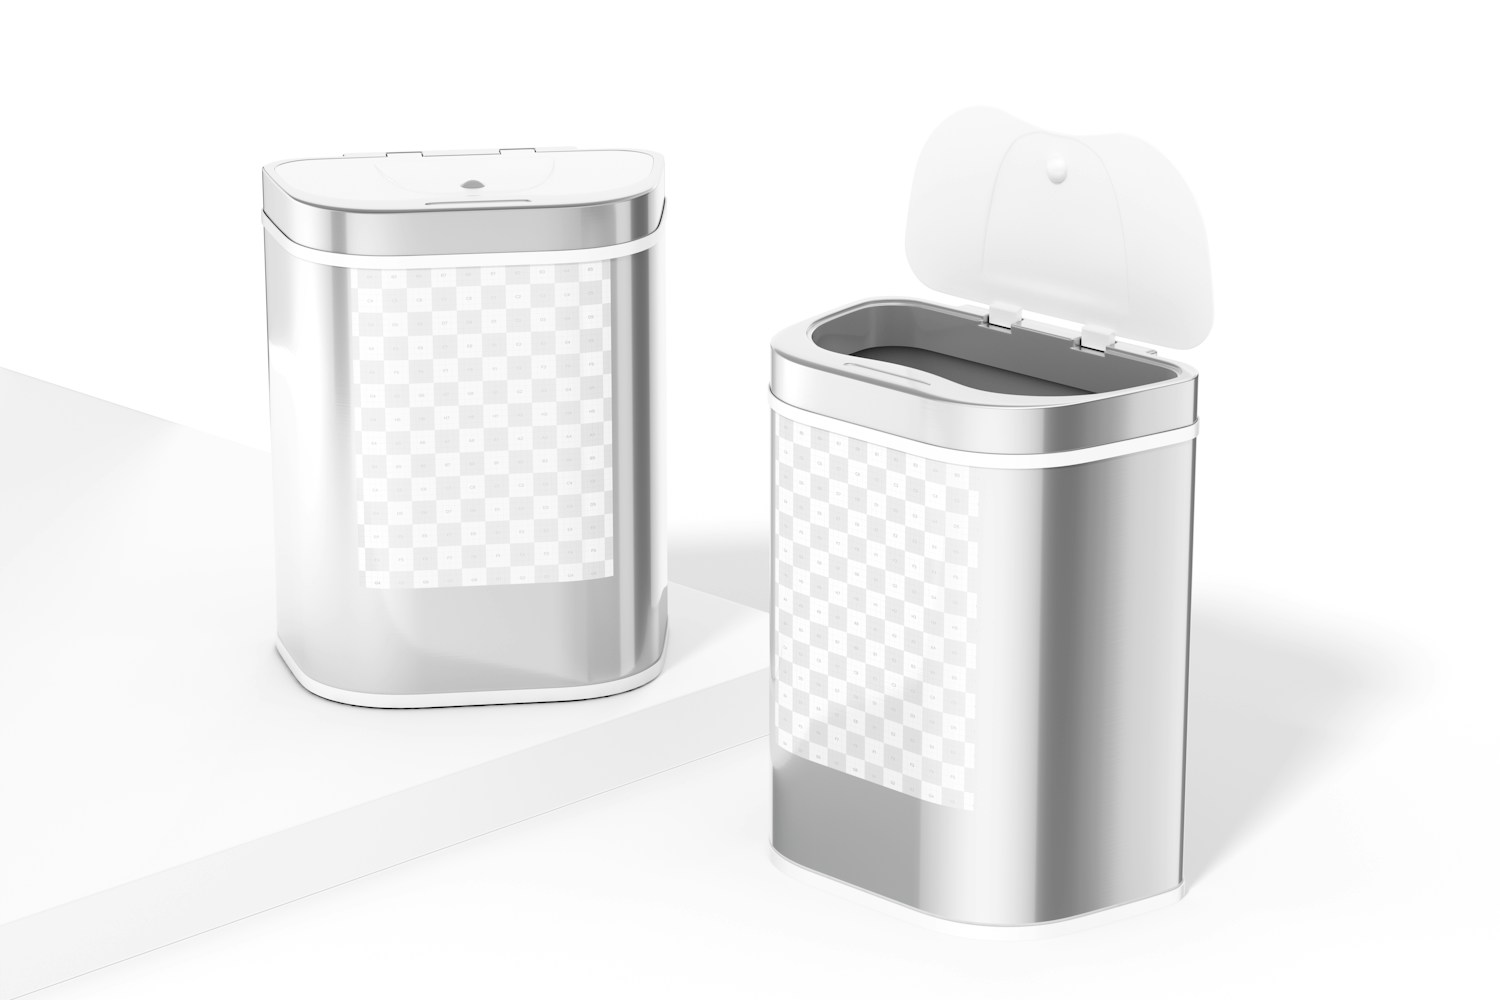 Garbage Cans with Lid Mockup, Opened and Closed